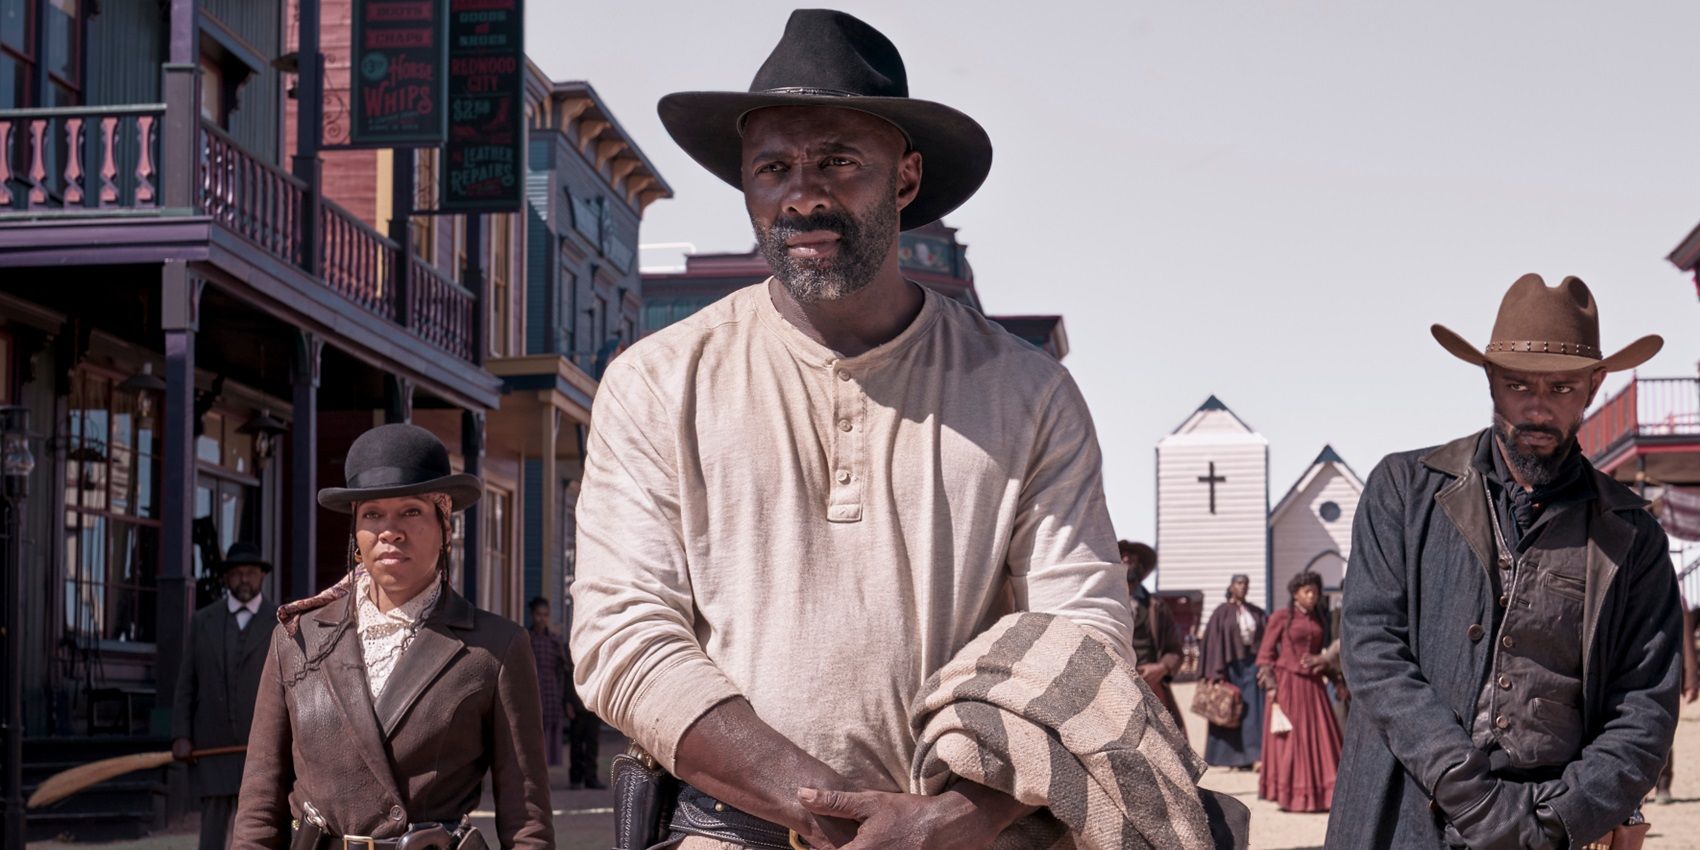 The 10 Best Black Cowboy Movies & Westerns To Watch Now